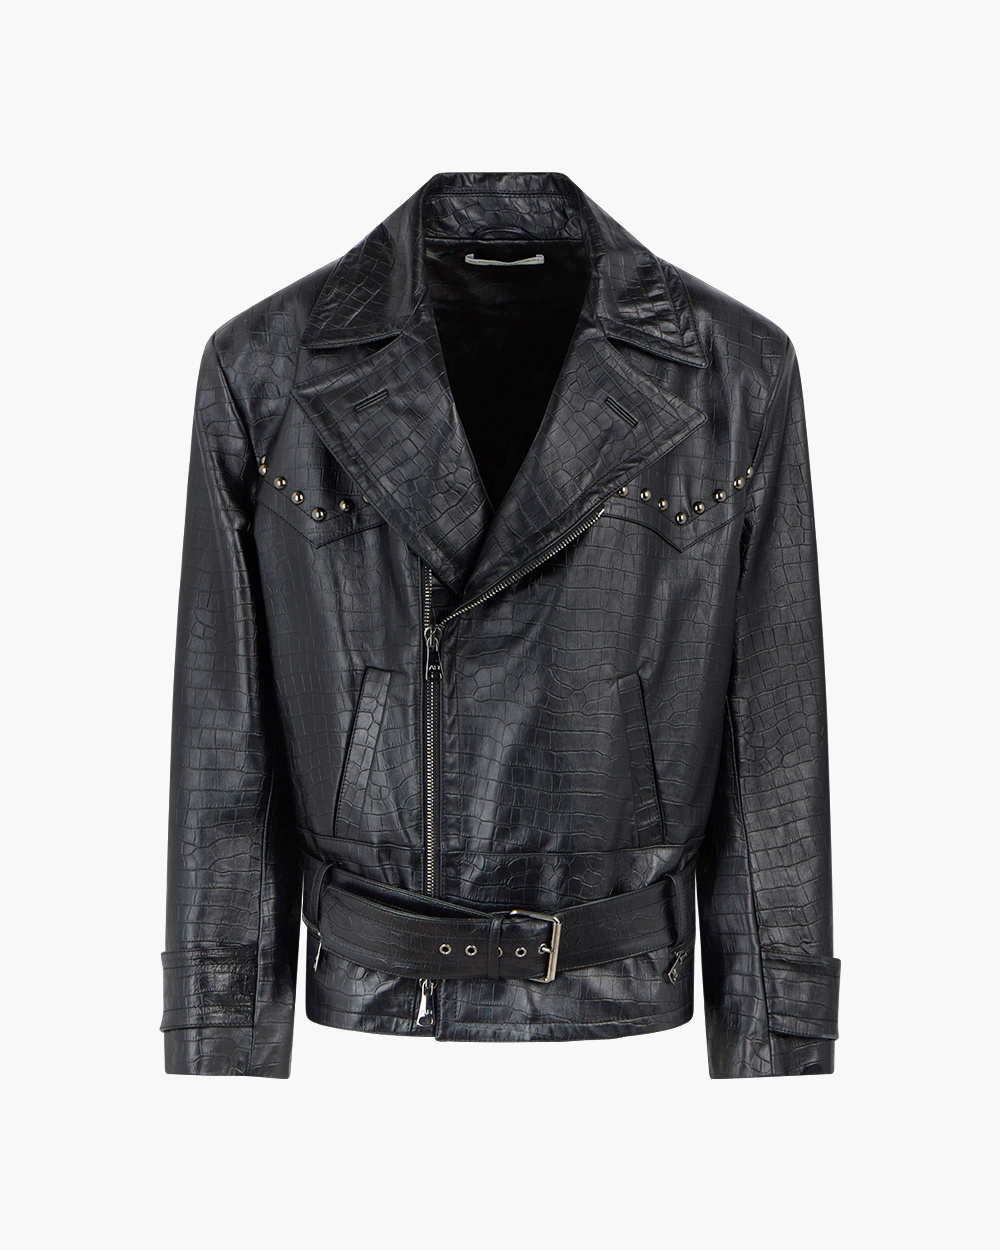 BLACK OVERSIZE BIKER JACKET IN CROCO-PRINT LEATHER WITH STUDS